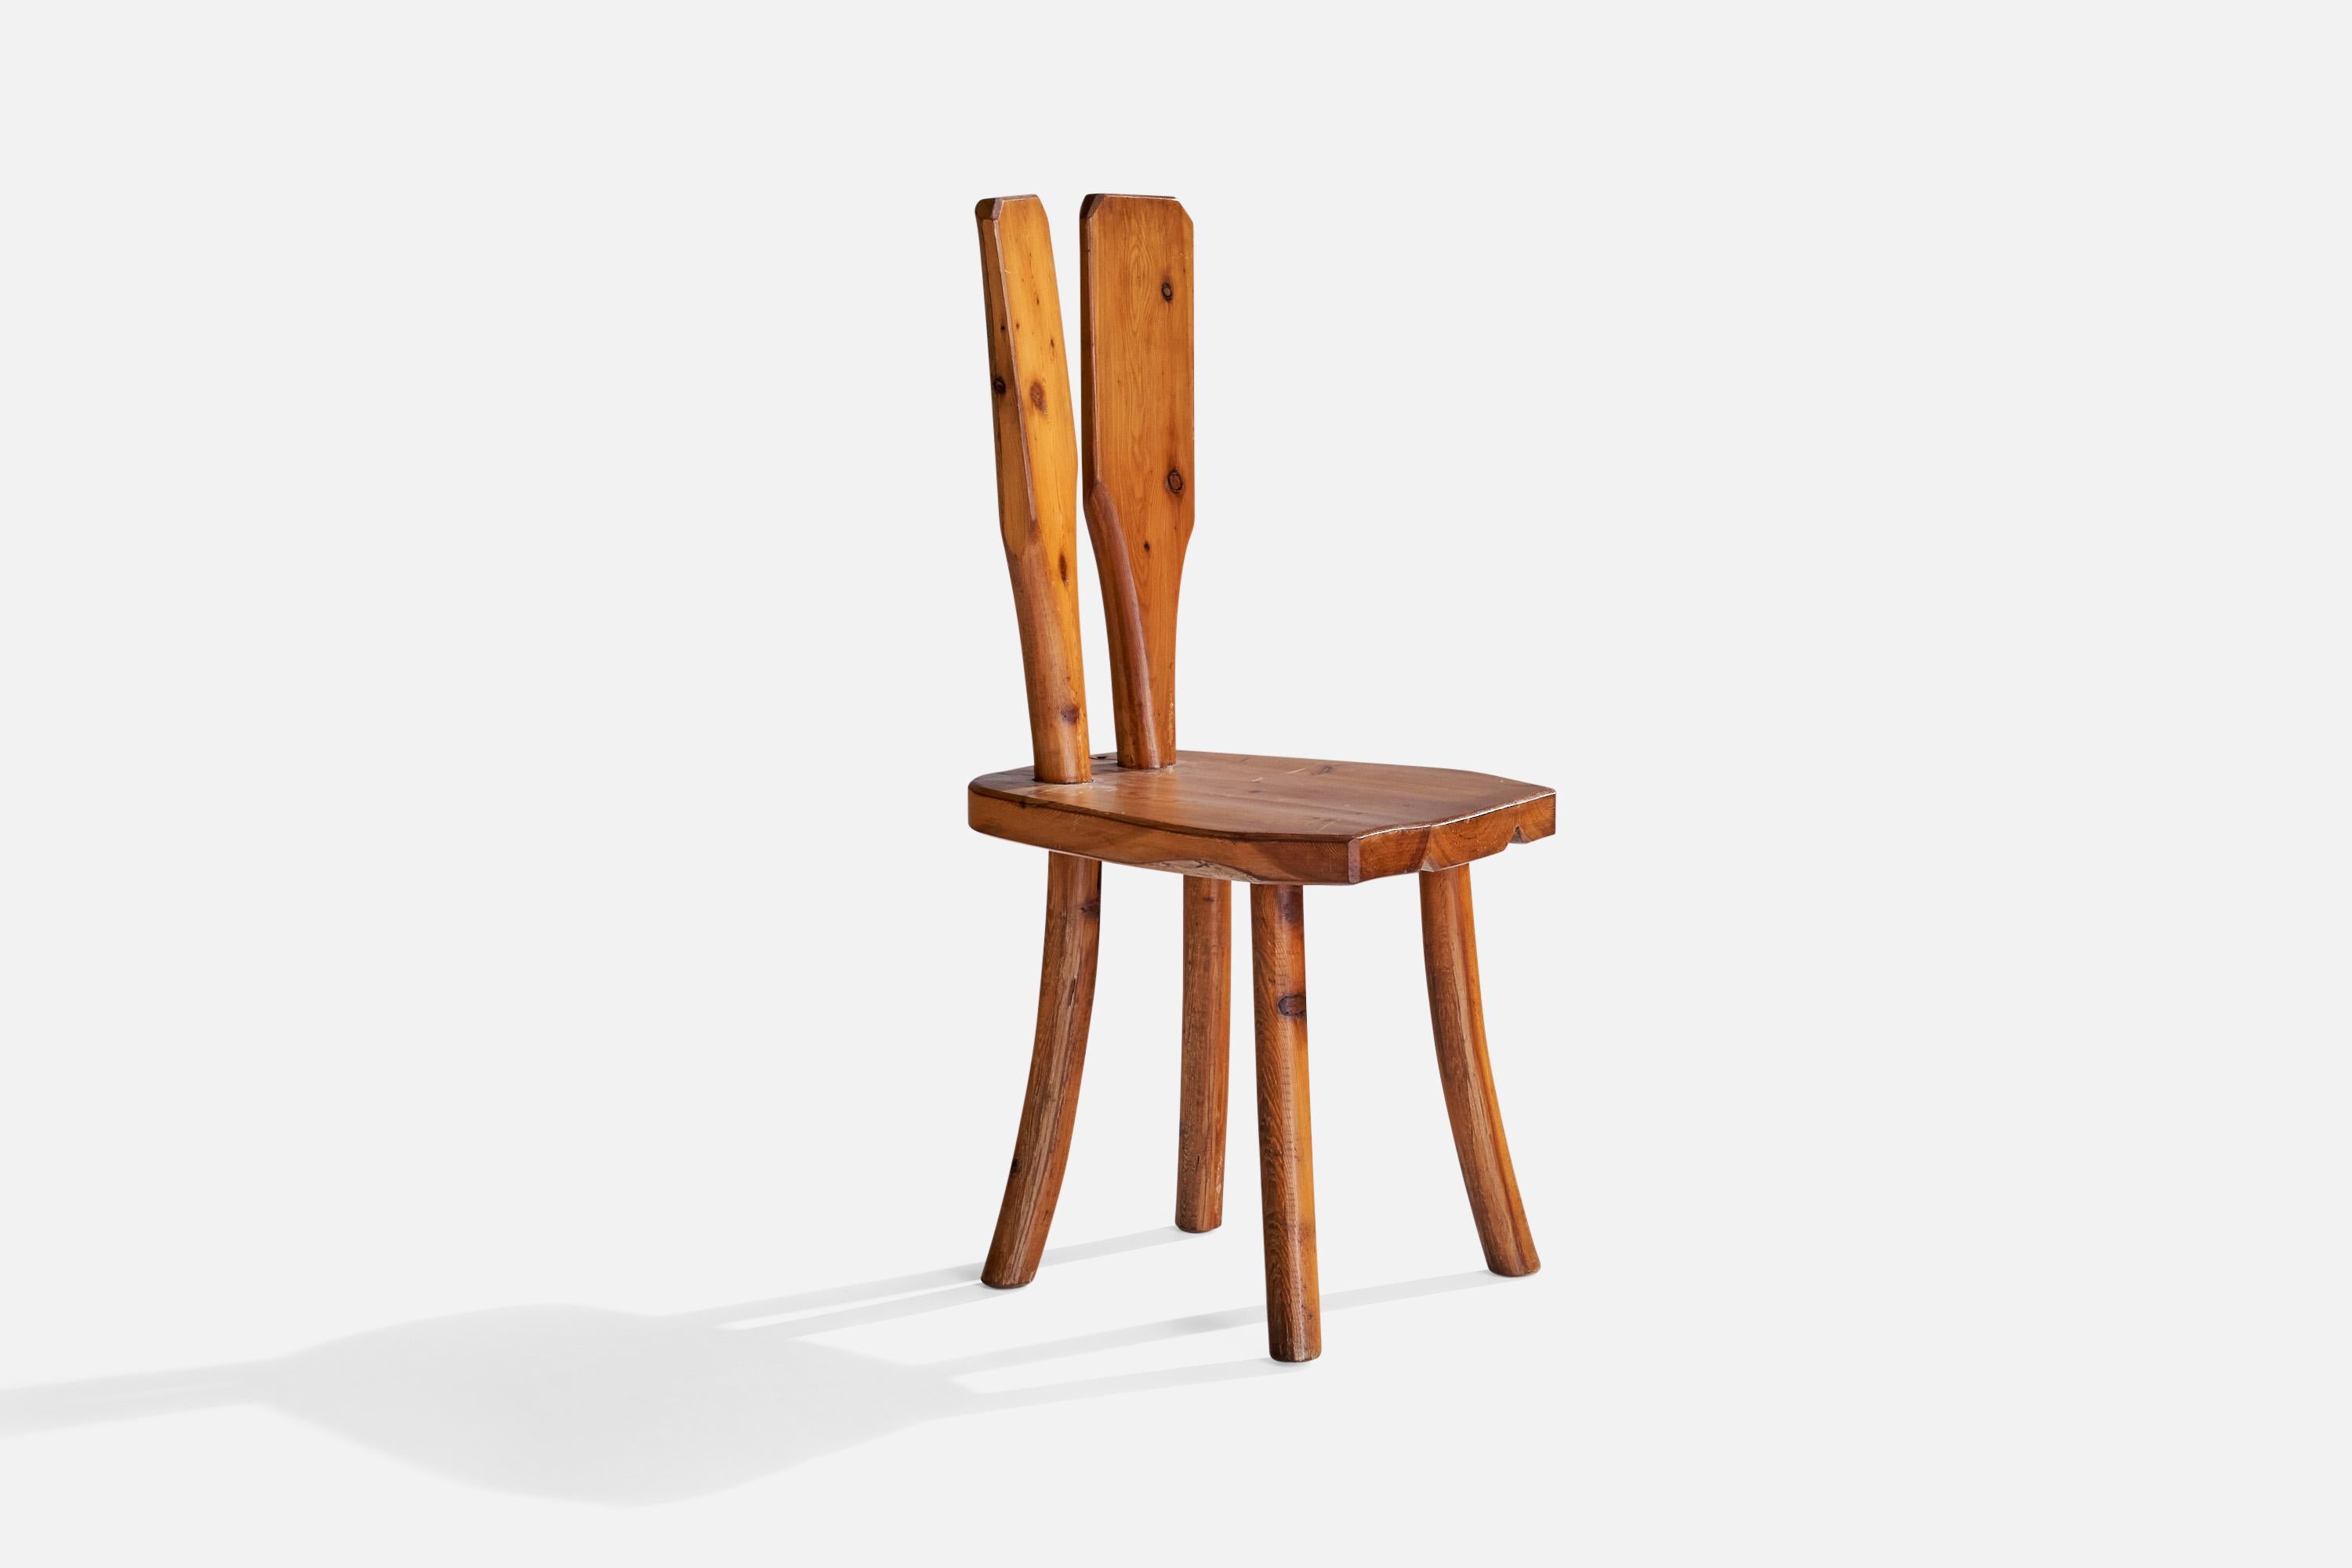 A pine side chair designed and produced in Italy, 1950s.

Seat height 17.75”.